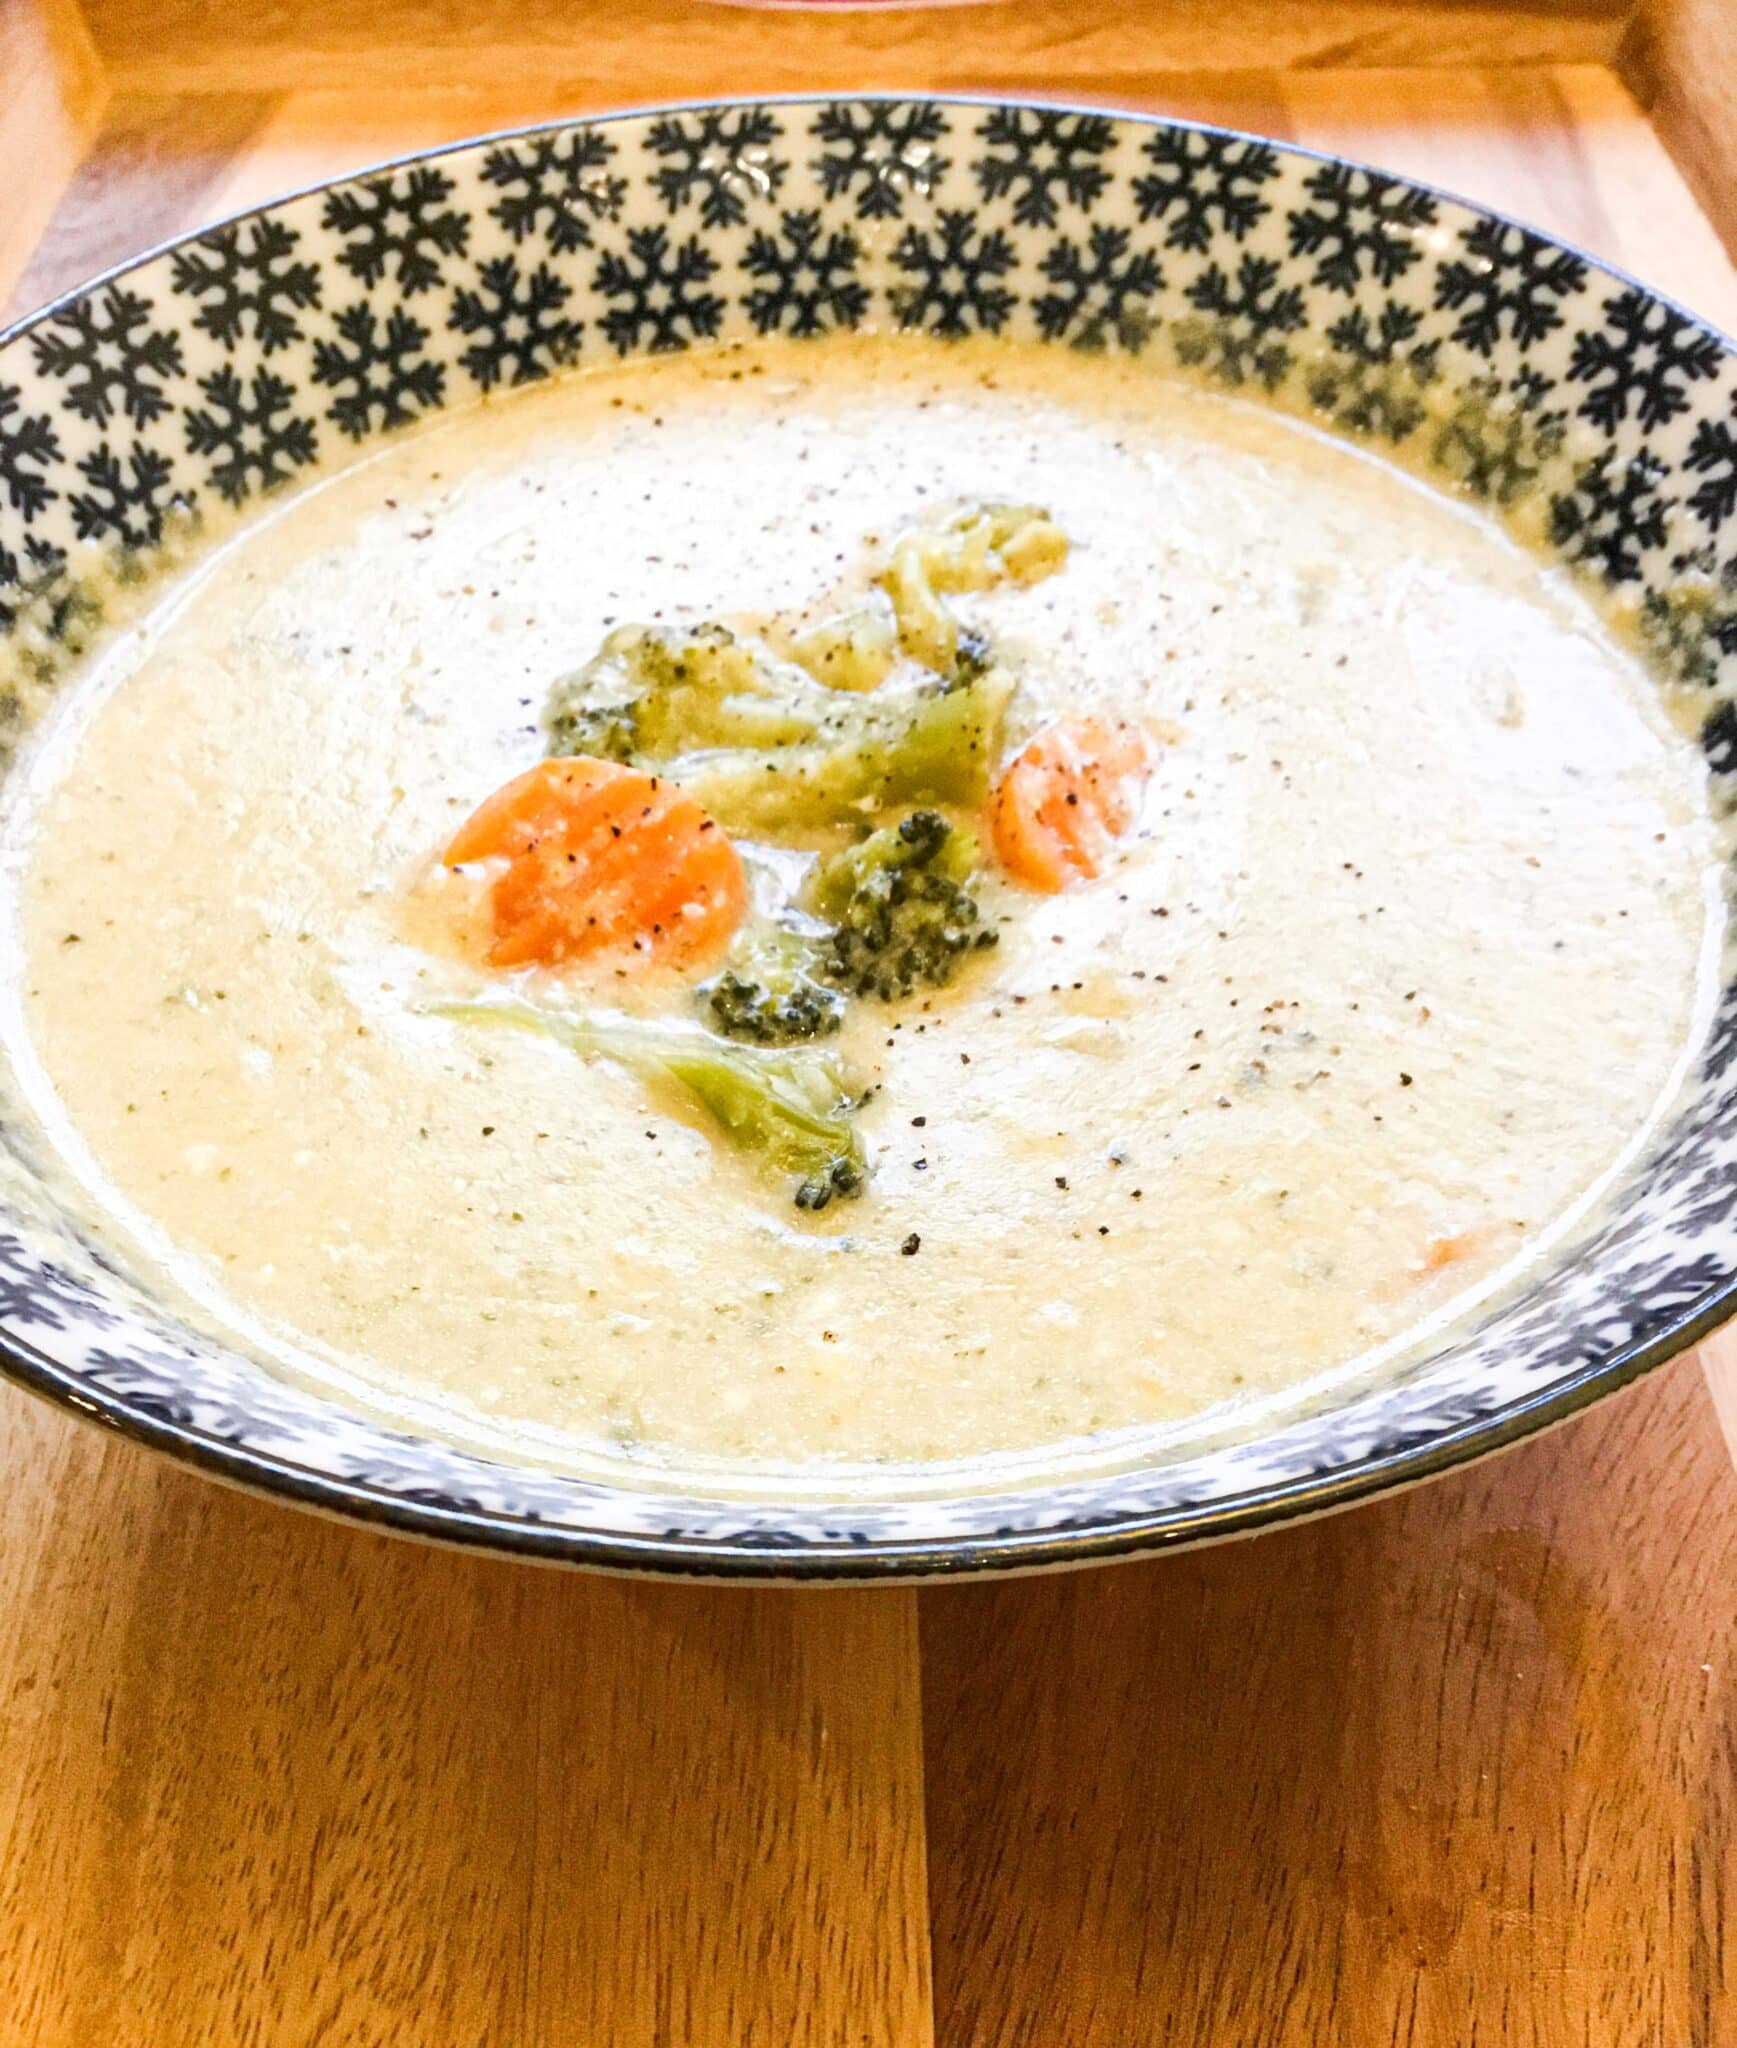 Vegetarian broccoli yogurt soup (easy, creamy, & healthy) recipe is ready and served on a dark blue color printed bowl.